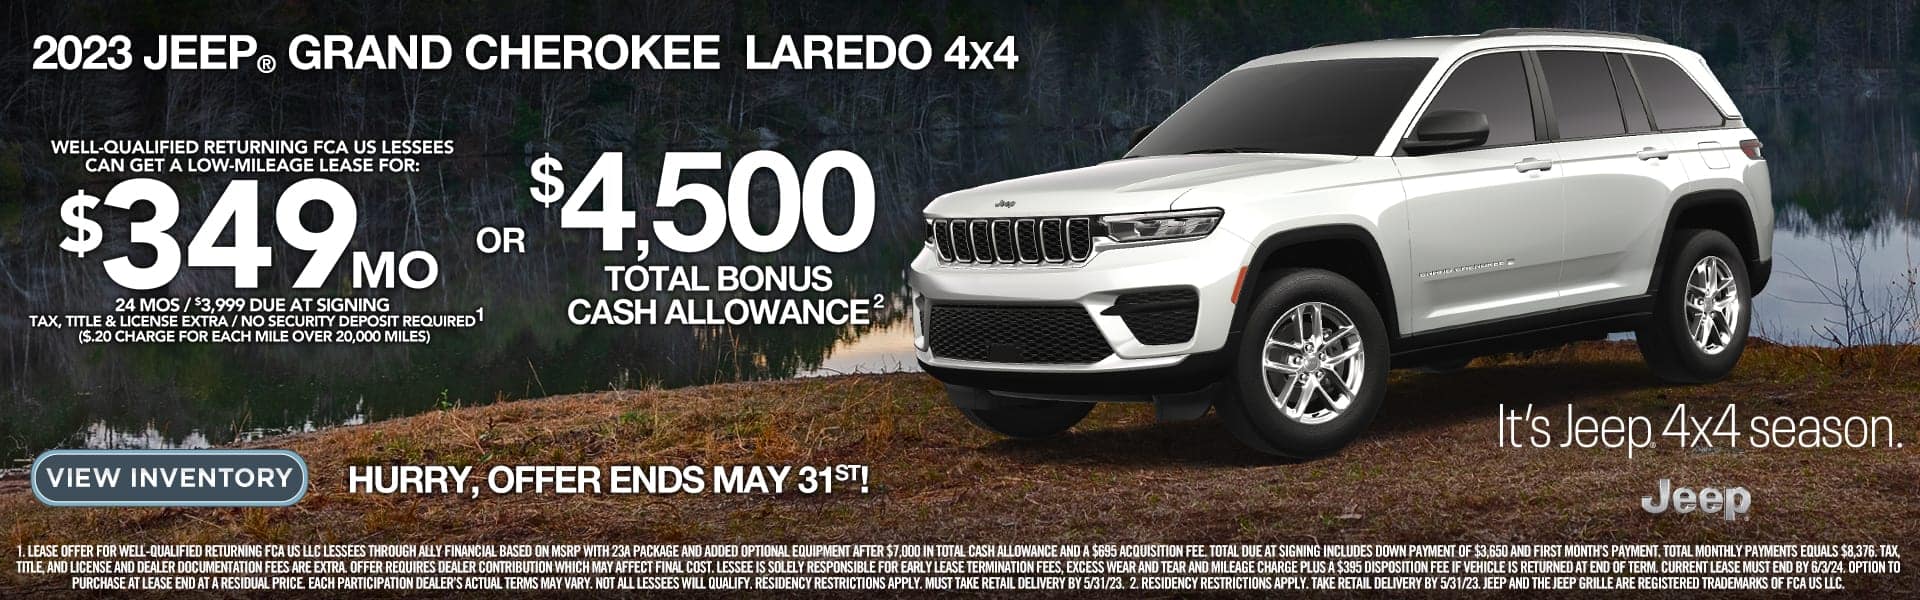 2023 Jeep Grand Cherokee offer